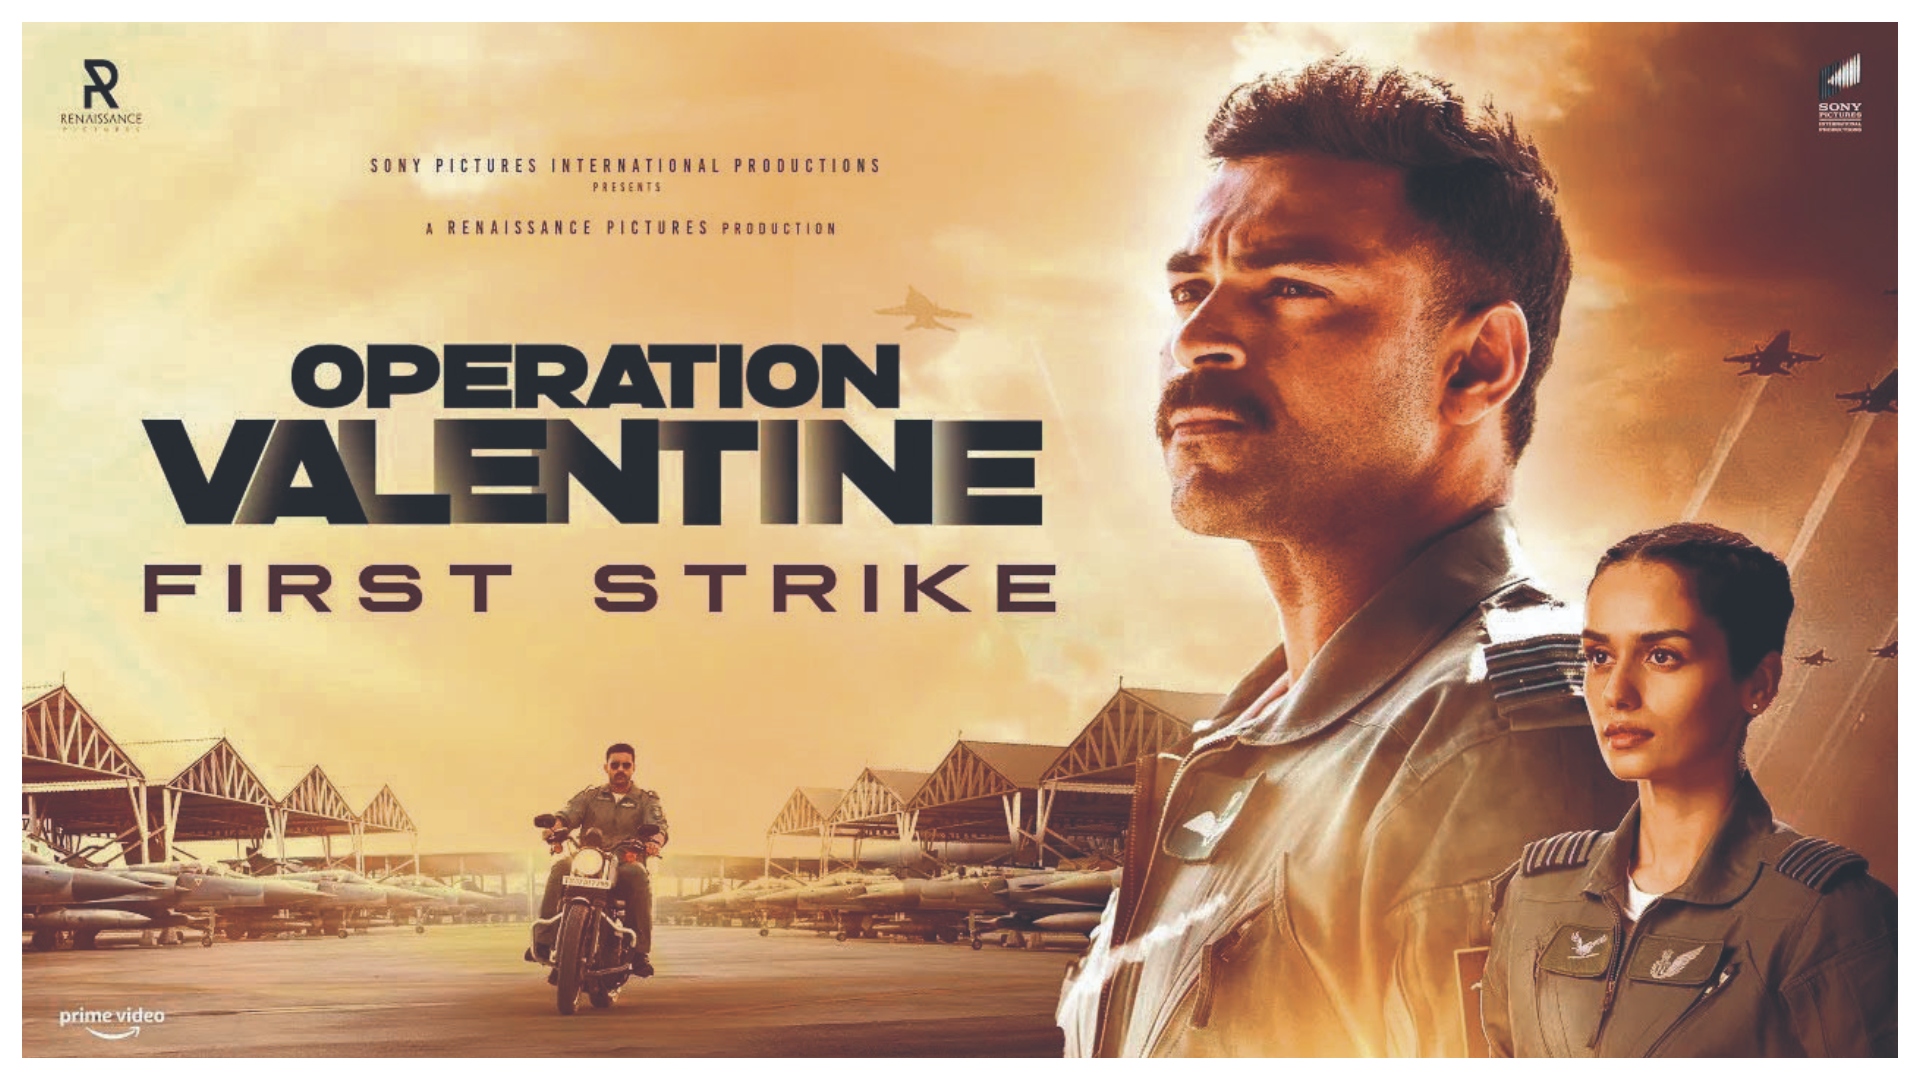 Will Varun Tej make a successful Bollywood debut with ‘Operation Valentine’? | Trade talk